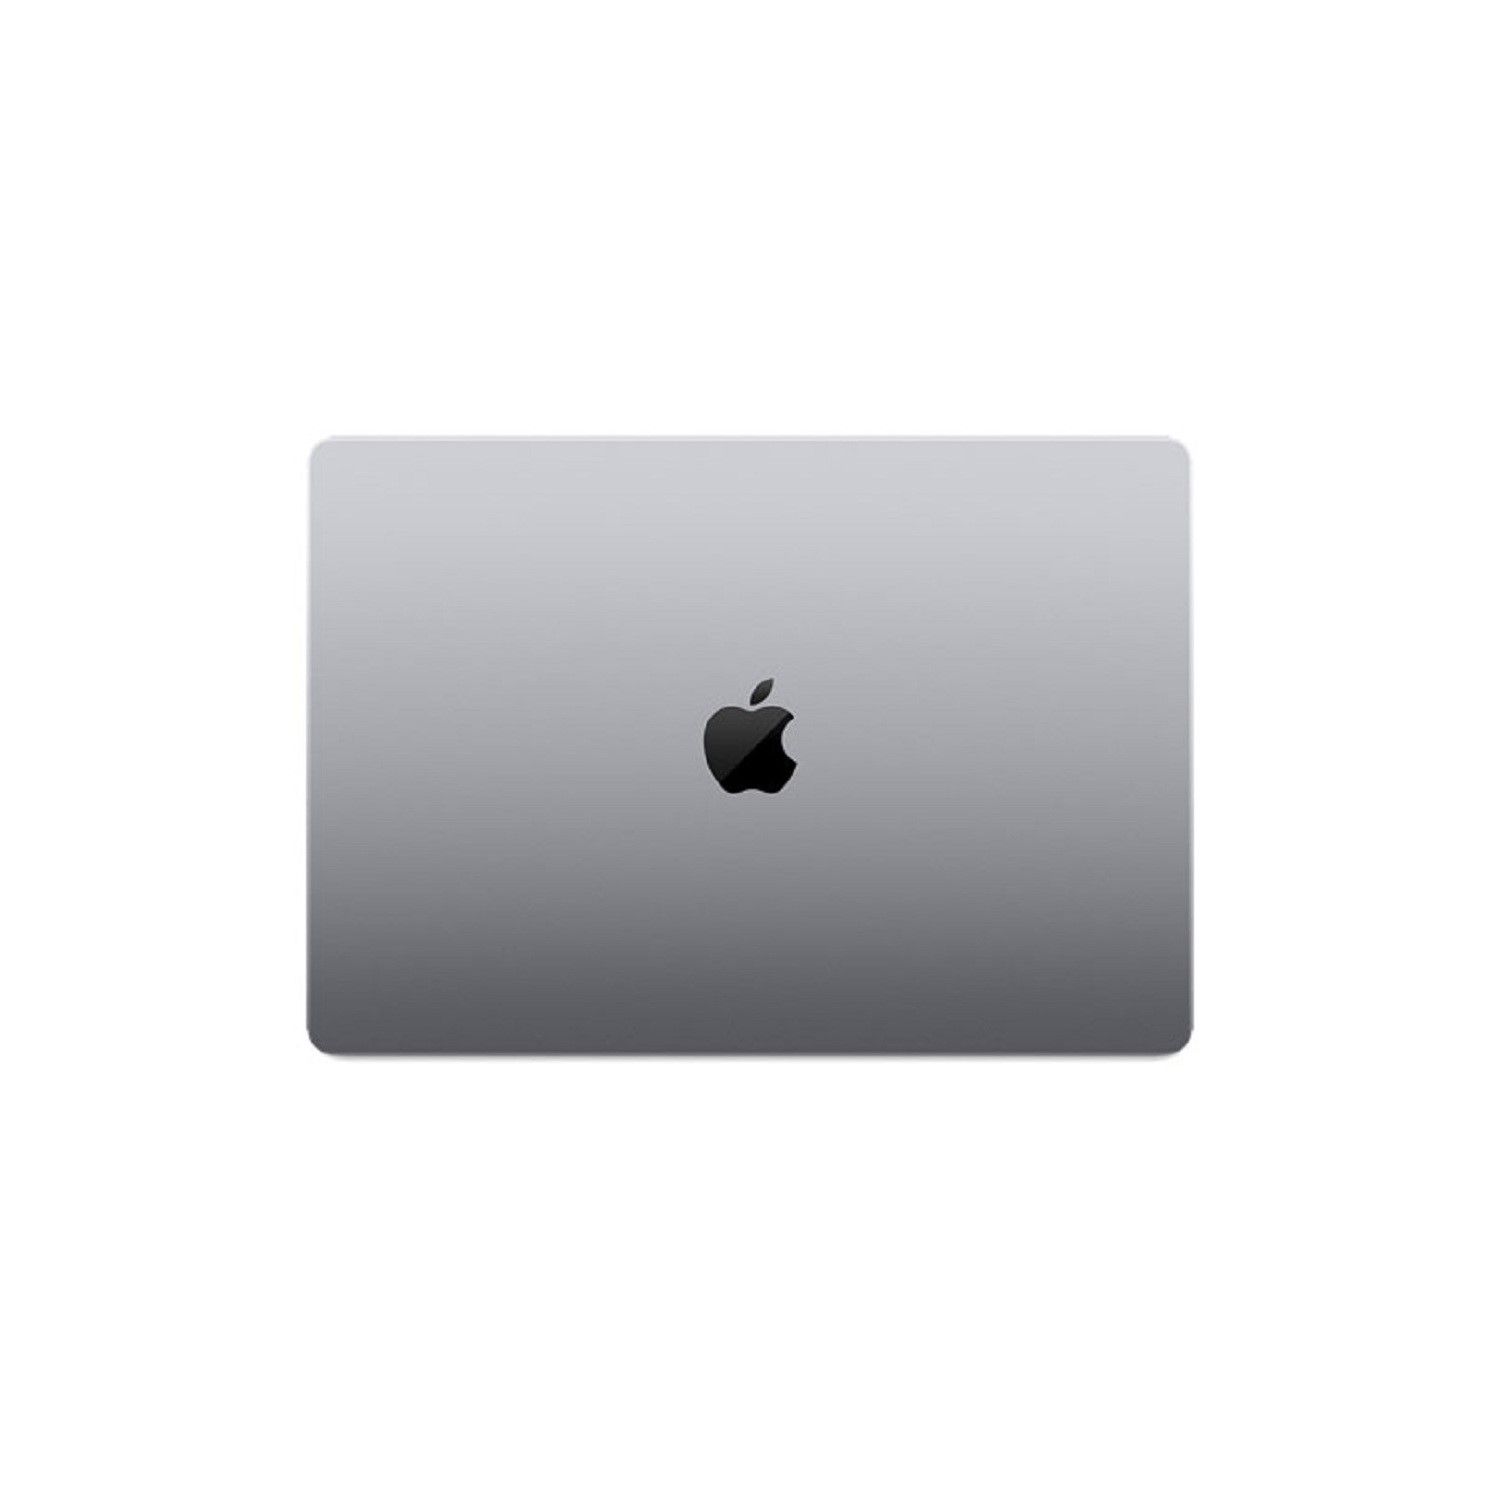 Apple MacBook Pro 16 (512GB SSD, M1 Pro, 16GB) Laptop - Space Gray -  MK183LL/A (October, 2021) for sale online